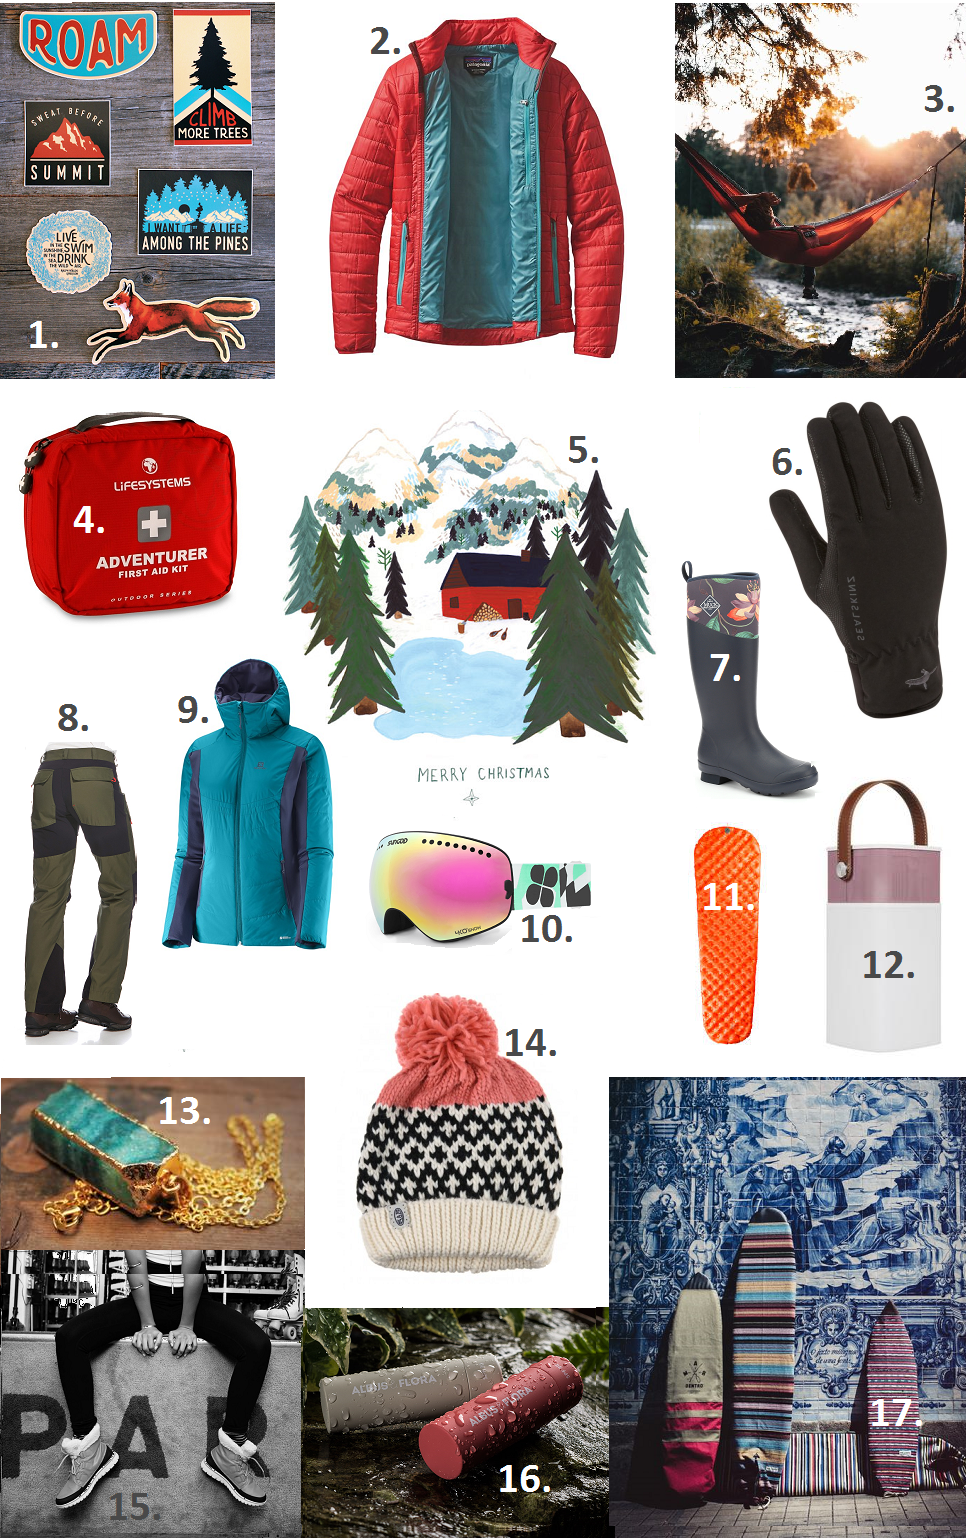 The great big outdoorsy Christmas gift guide 2016